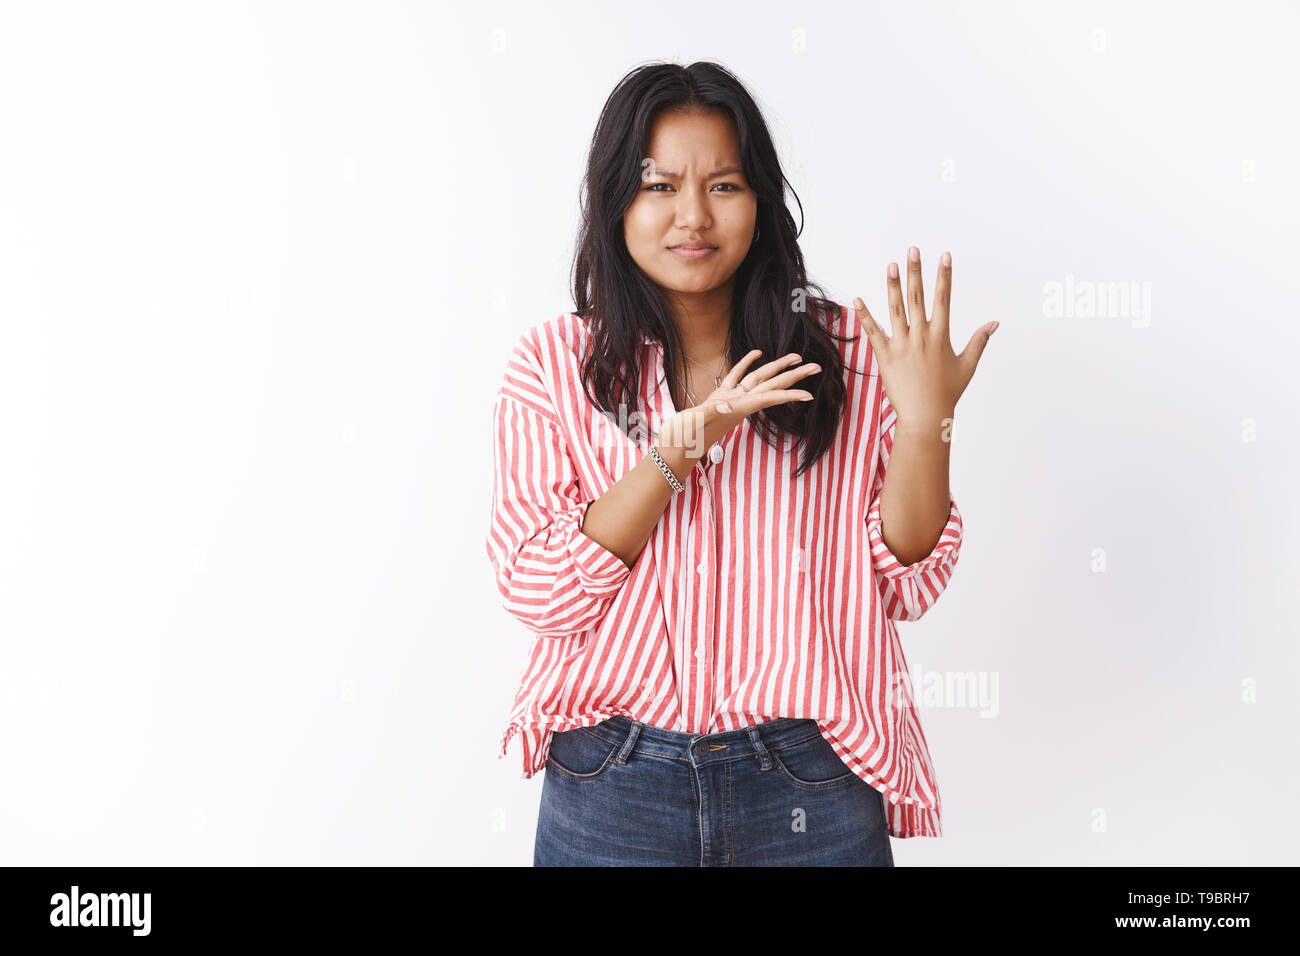 Woman feeling frustrated and displeased questioned where proposal she awaited on valentines day, showing palm without ring and pointing at arm Stock Photo